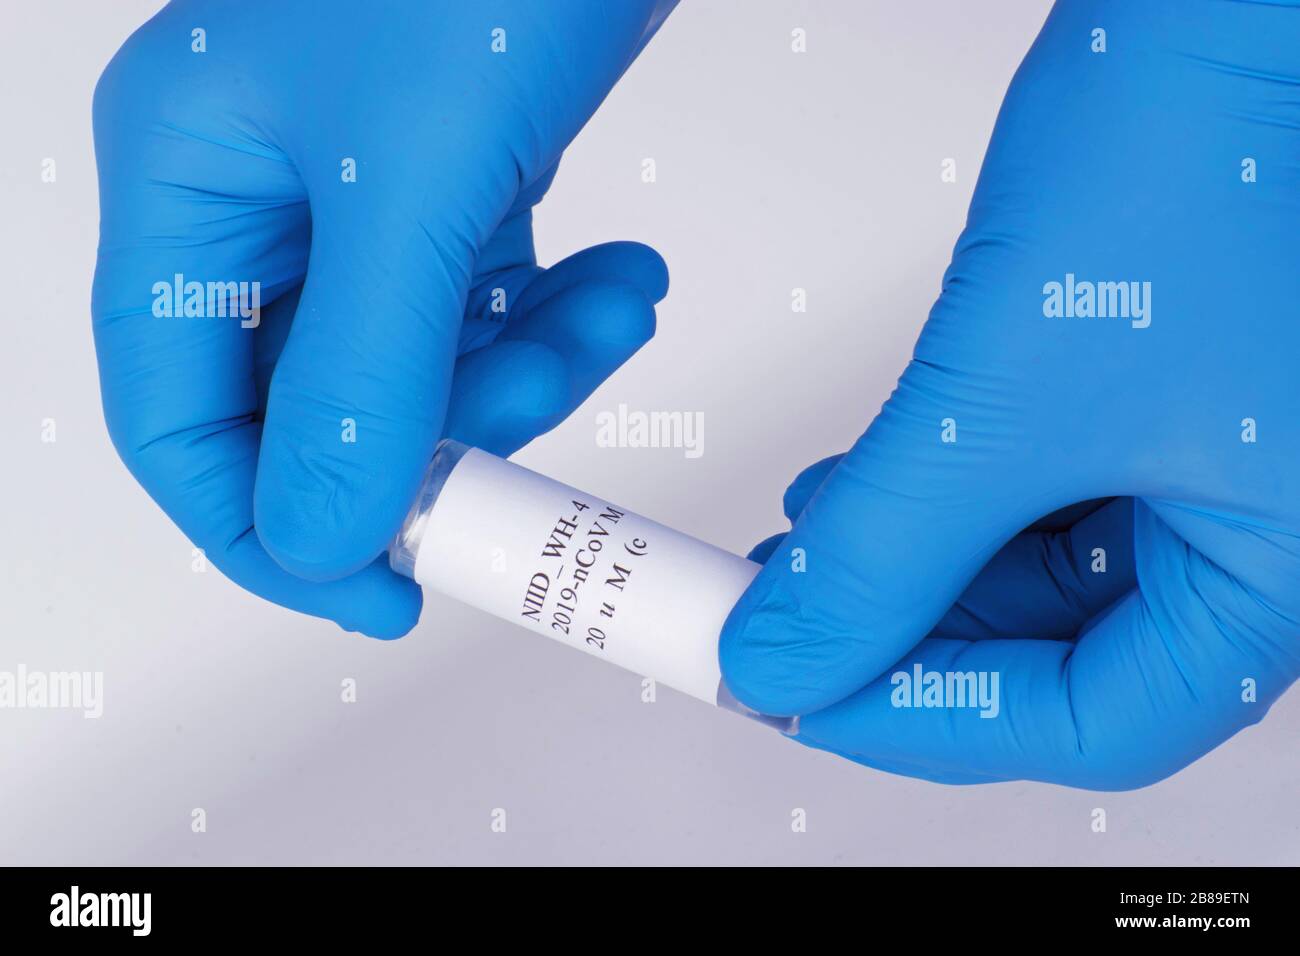 Coronavirus test held between two blue gloved hands up close Stock Photo